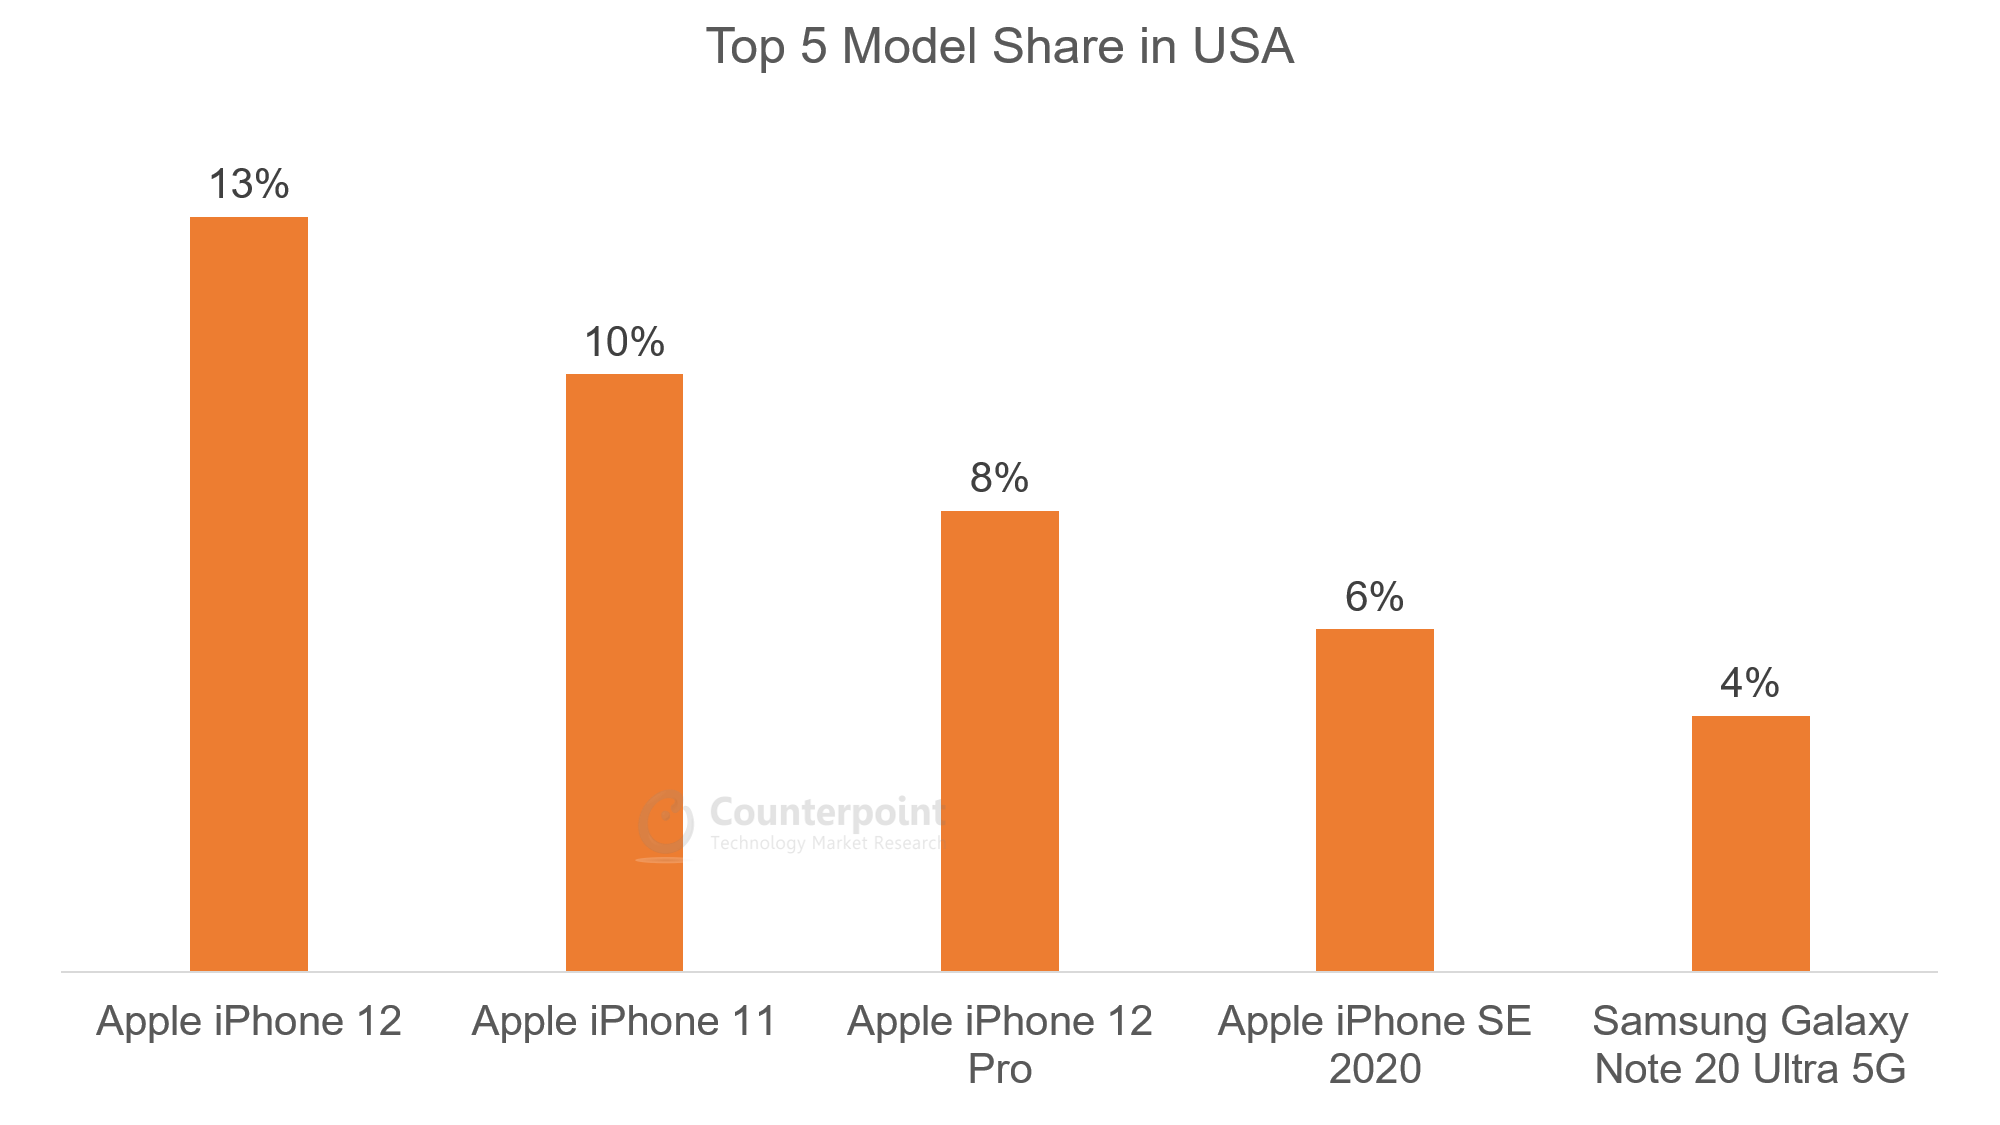 Top 5 Model Share in USA - Oct 2020